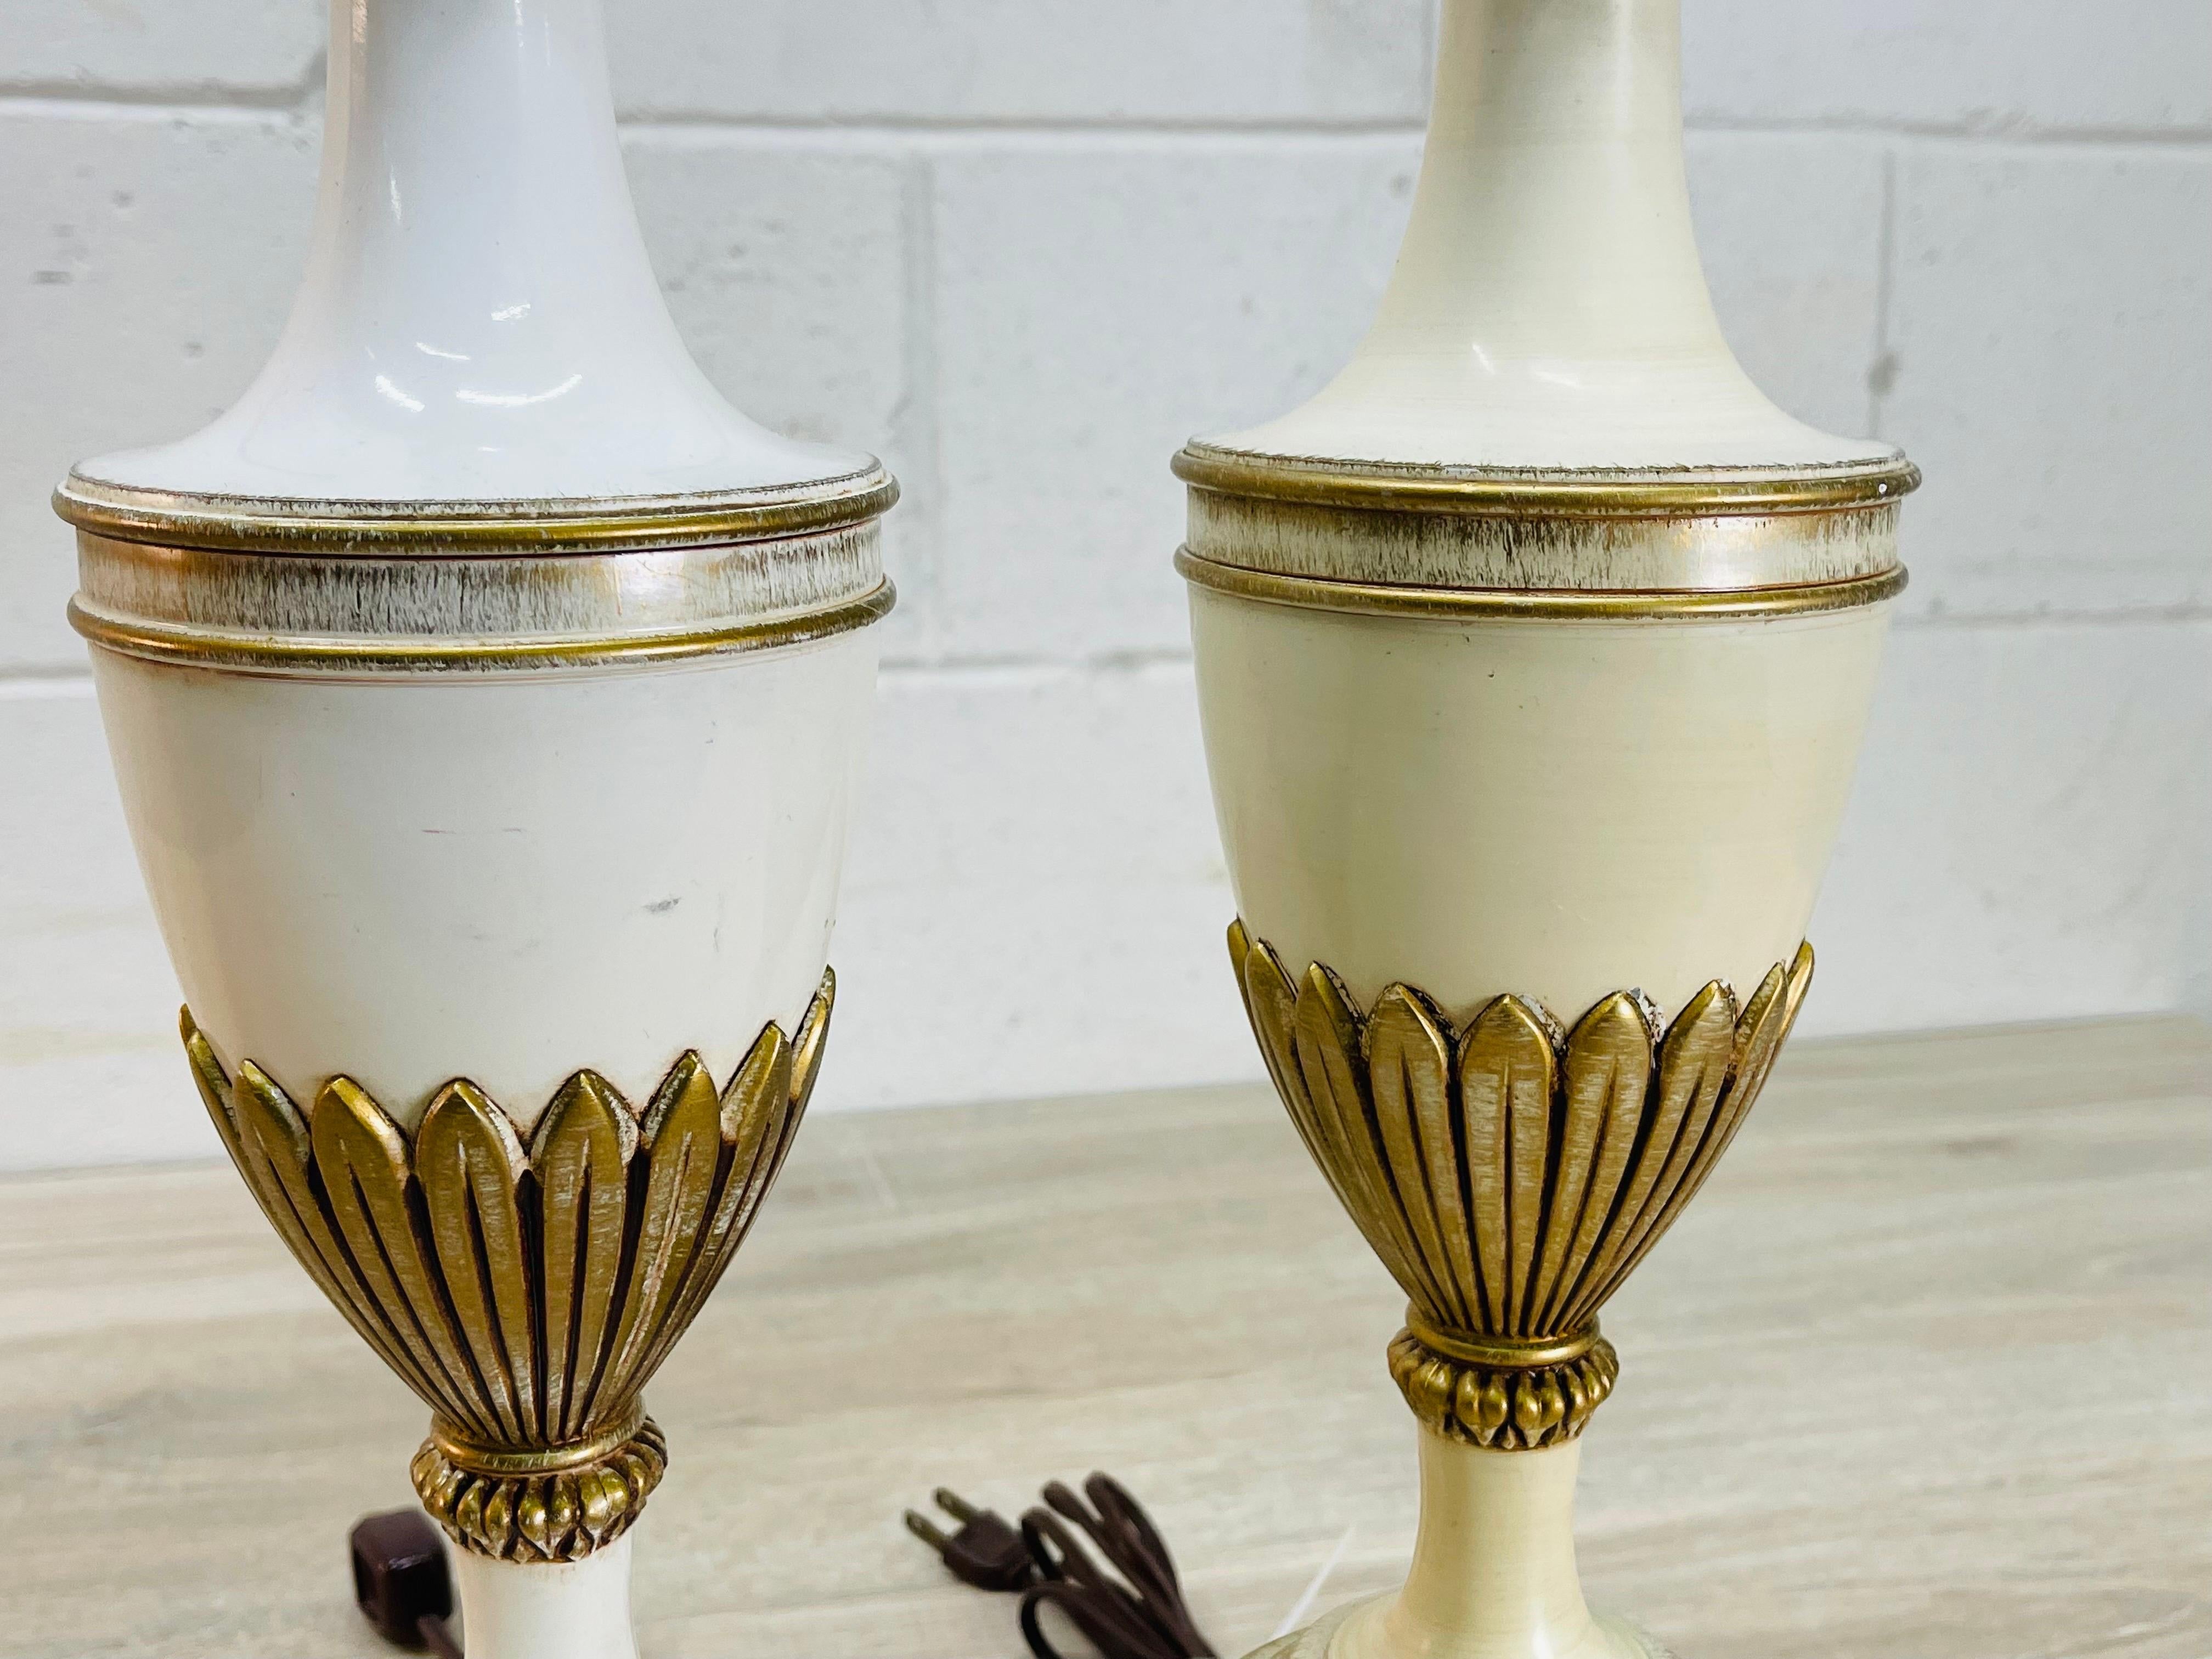 1960s Cream & Gold Stiffel Lamps, Pair In Good Condition For Sale In Amherst, NH